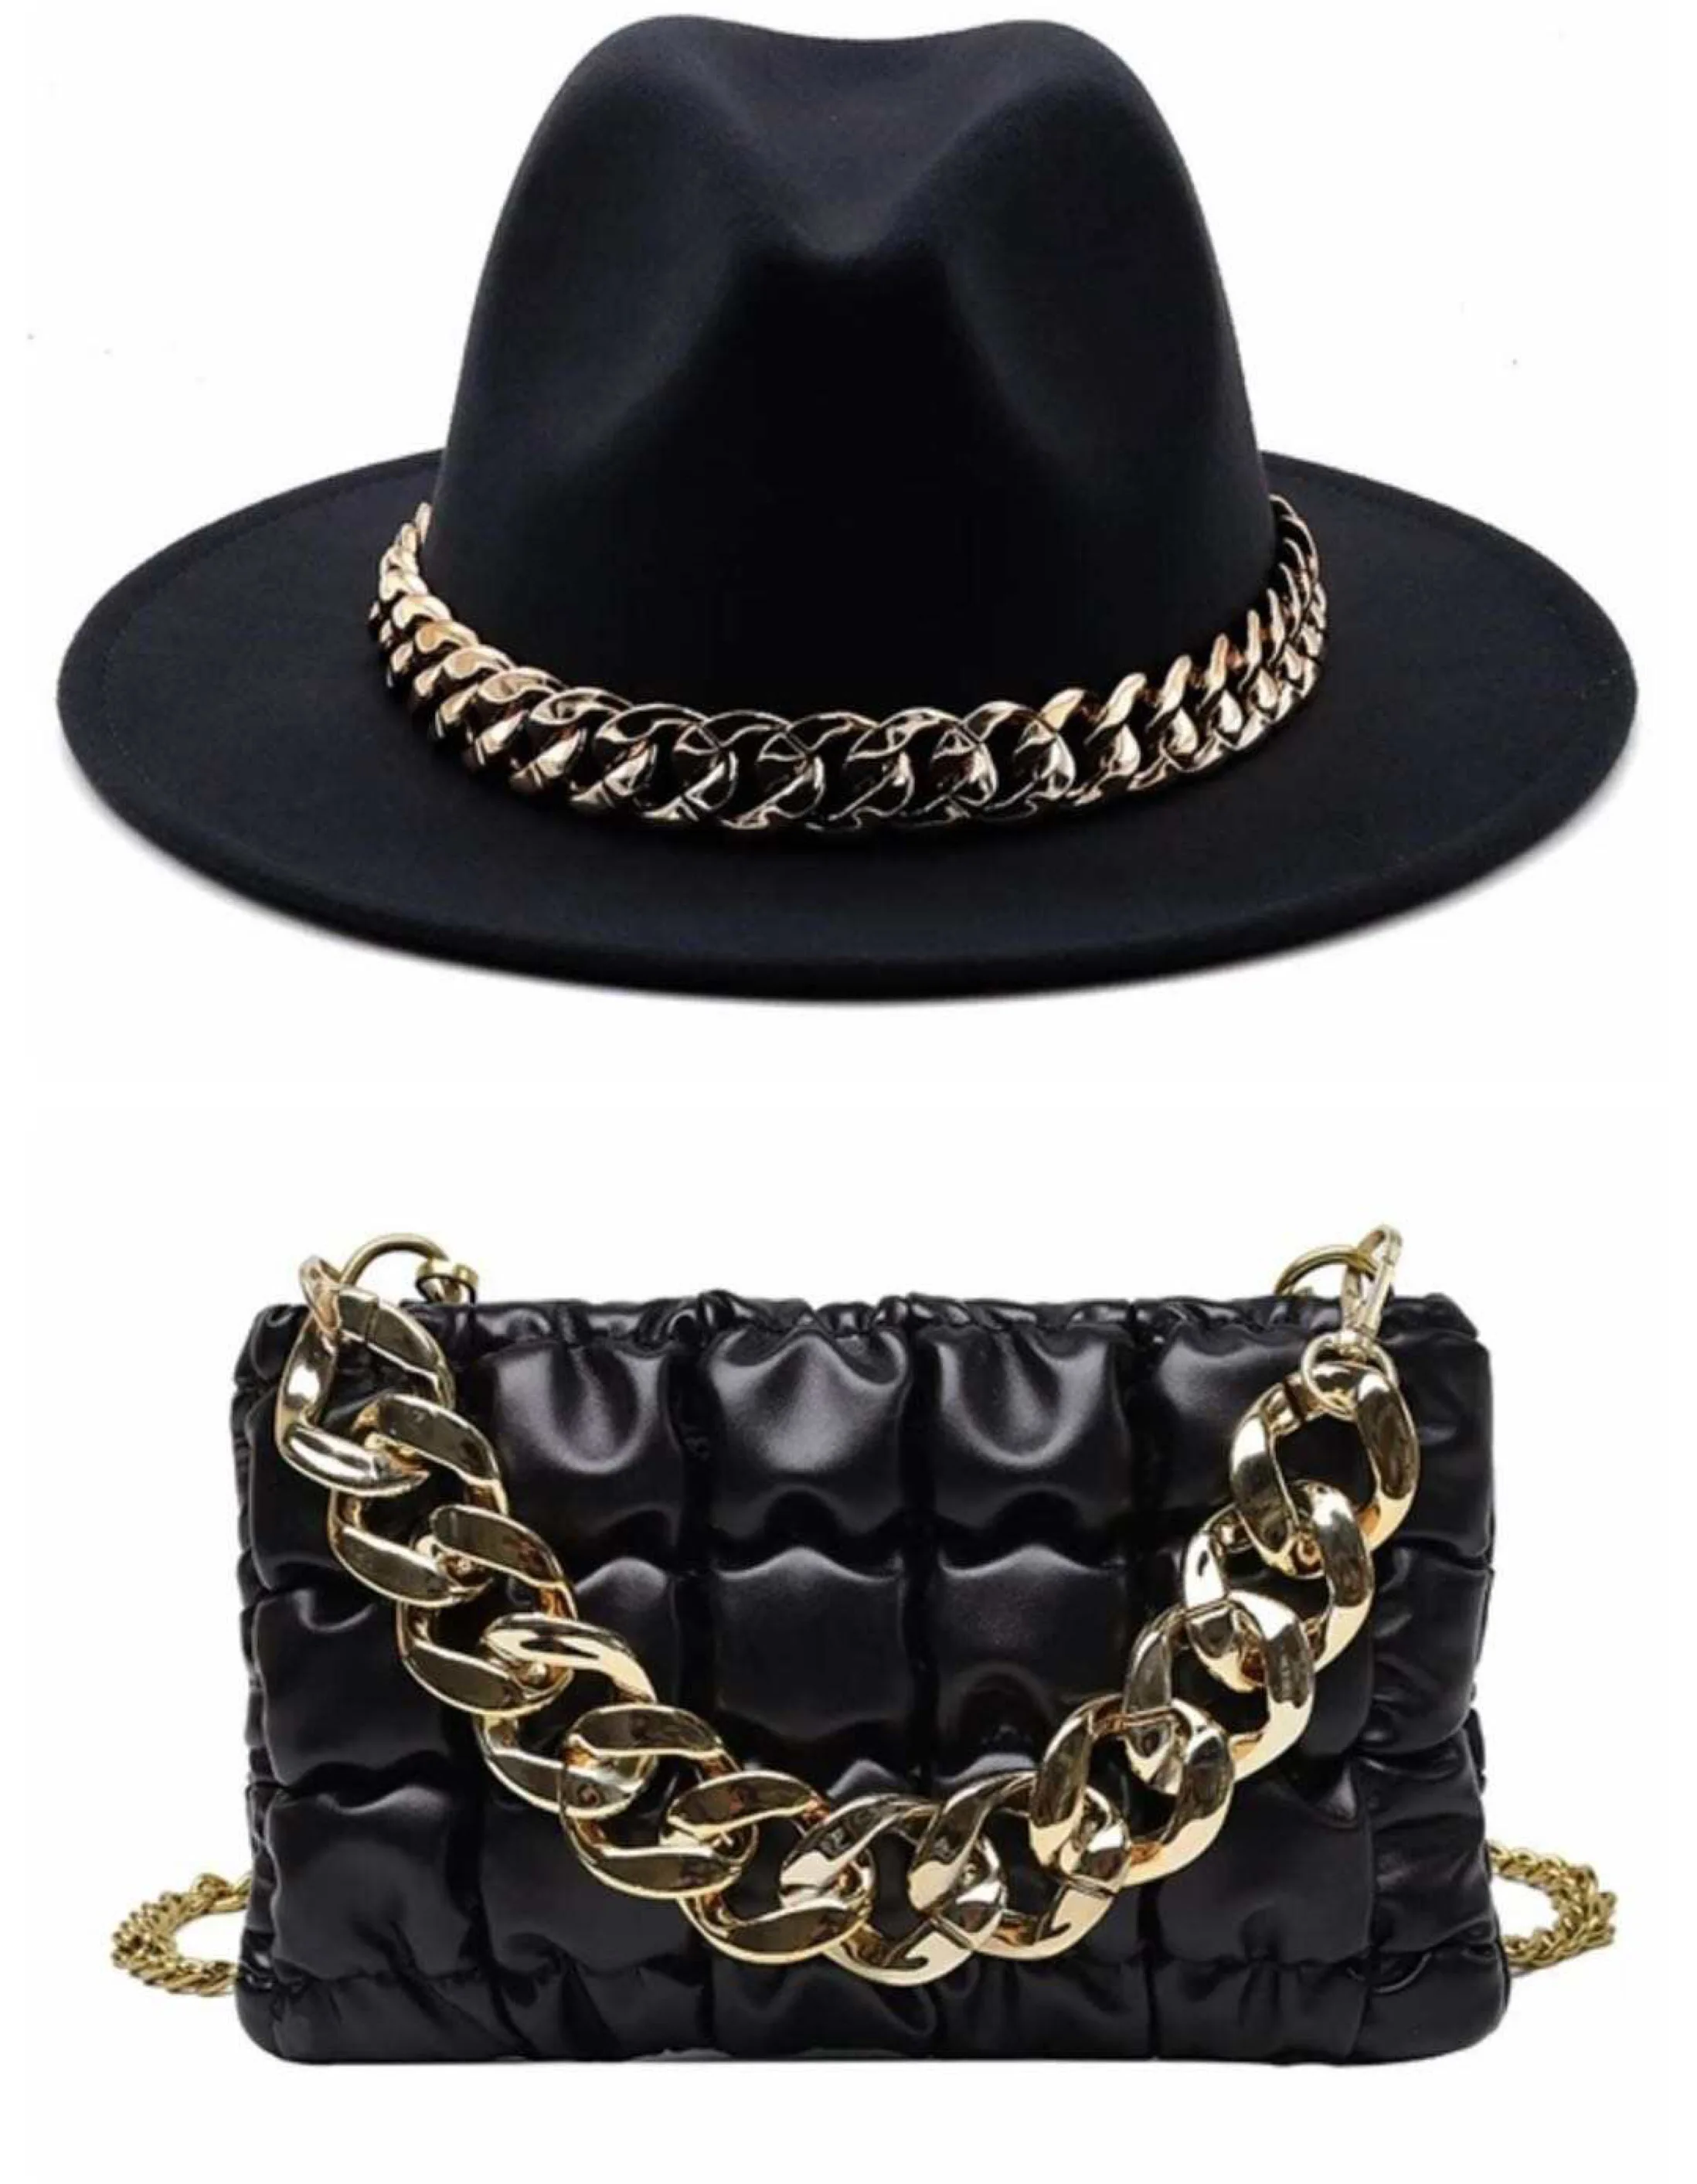 

Hats Bags Sets 2022 Ladies Small Square Quilted PU Leather Handbags Women Hand Purses Girl Metal Chain fedora hats and purses